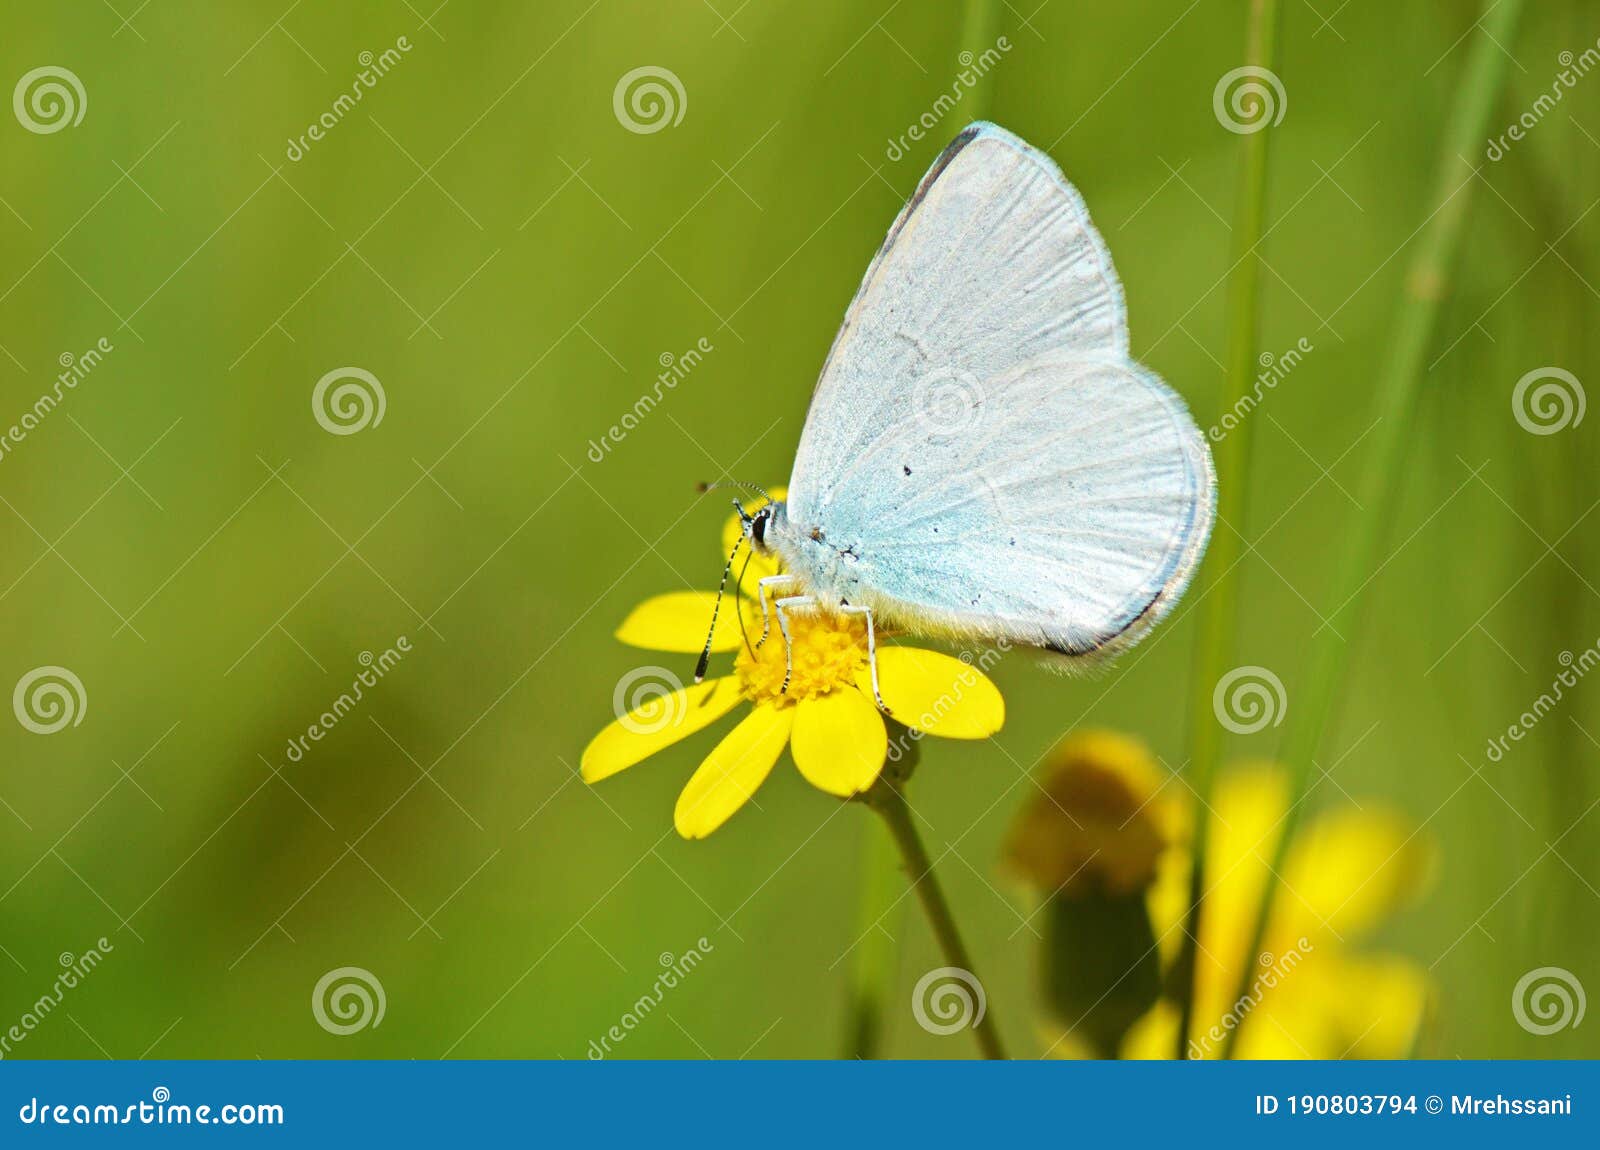 celastrina argiolus, the holly blue butterfly on yellow flower